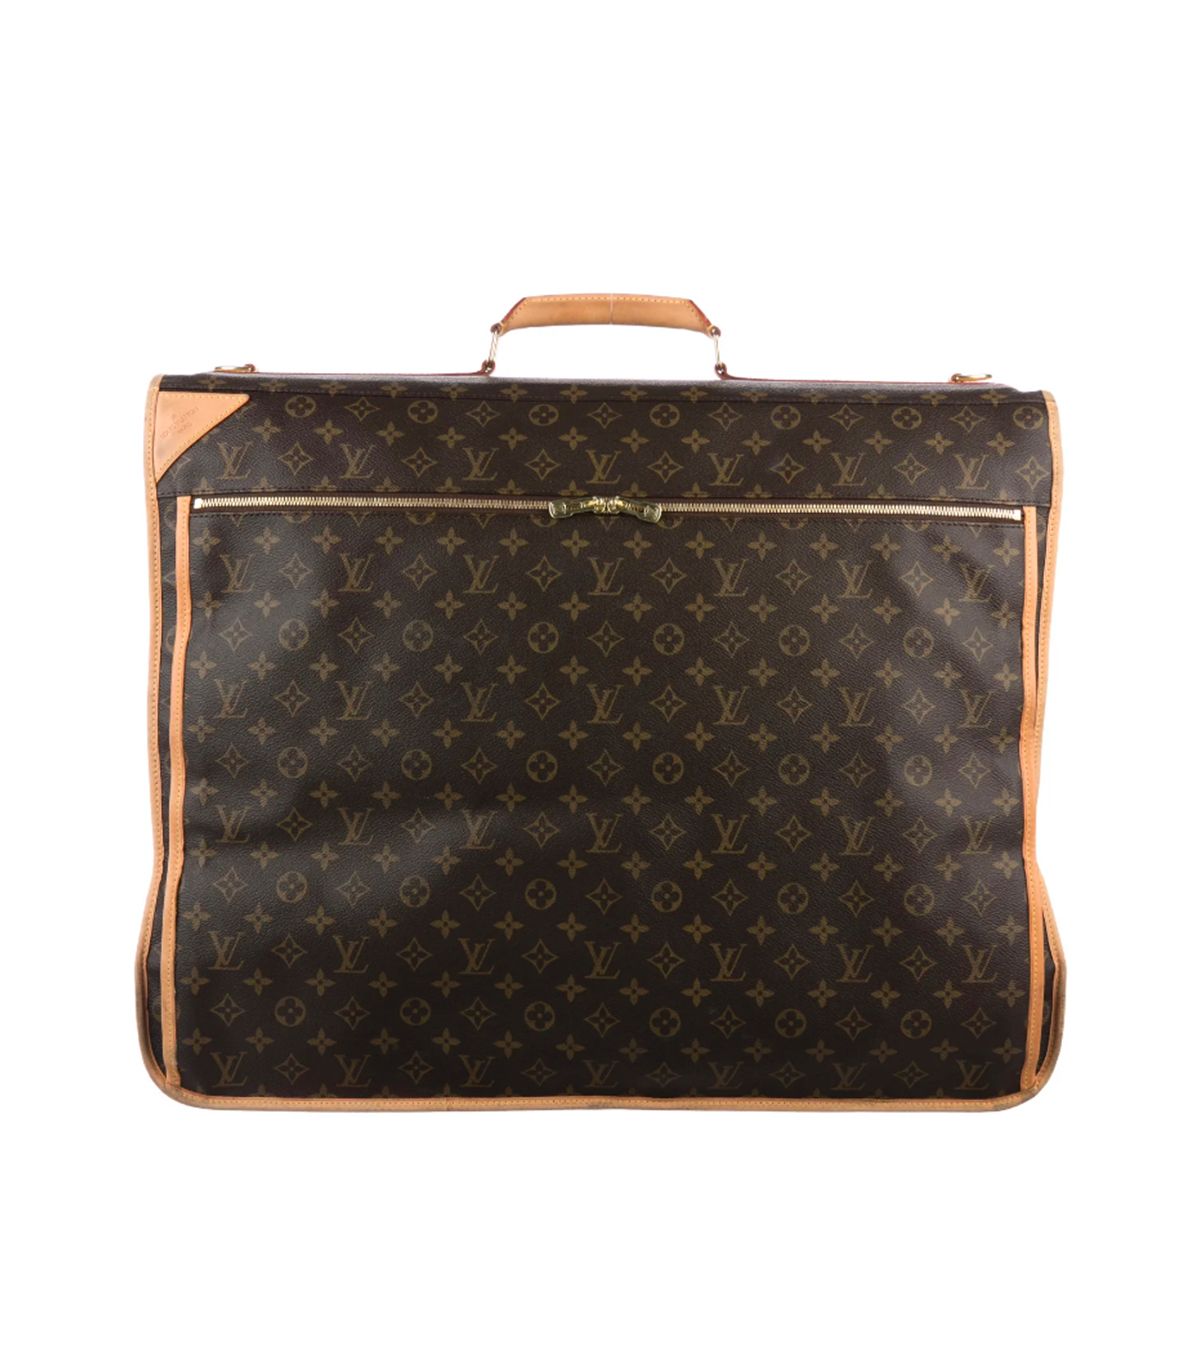 How to Shop Affordable Louis Vuitton Luggage | Who What Wear